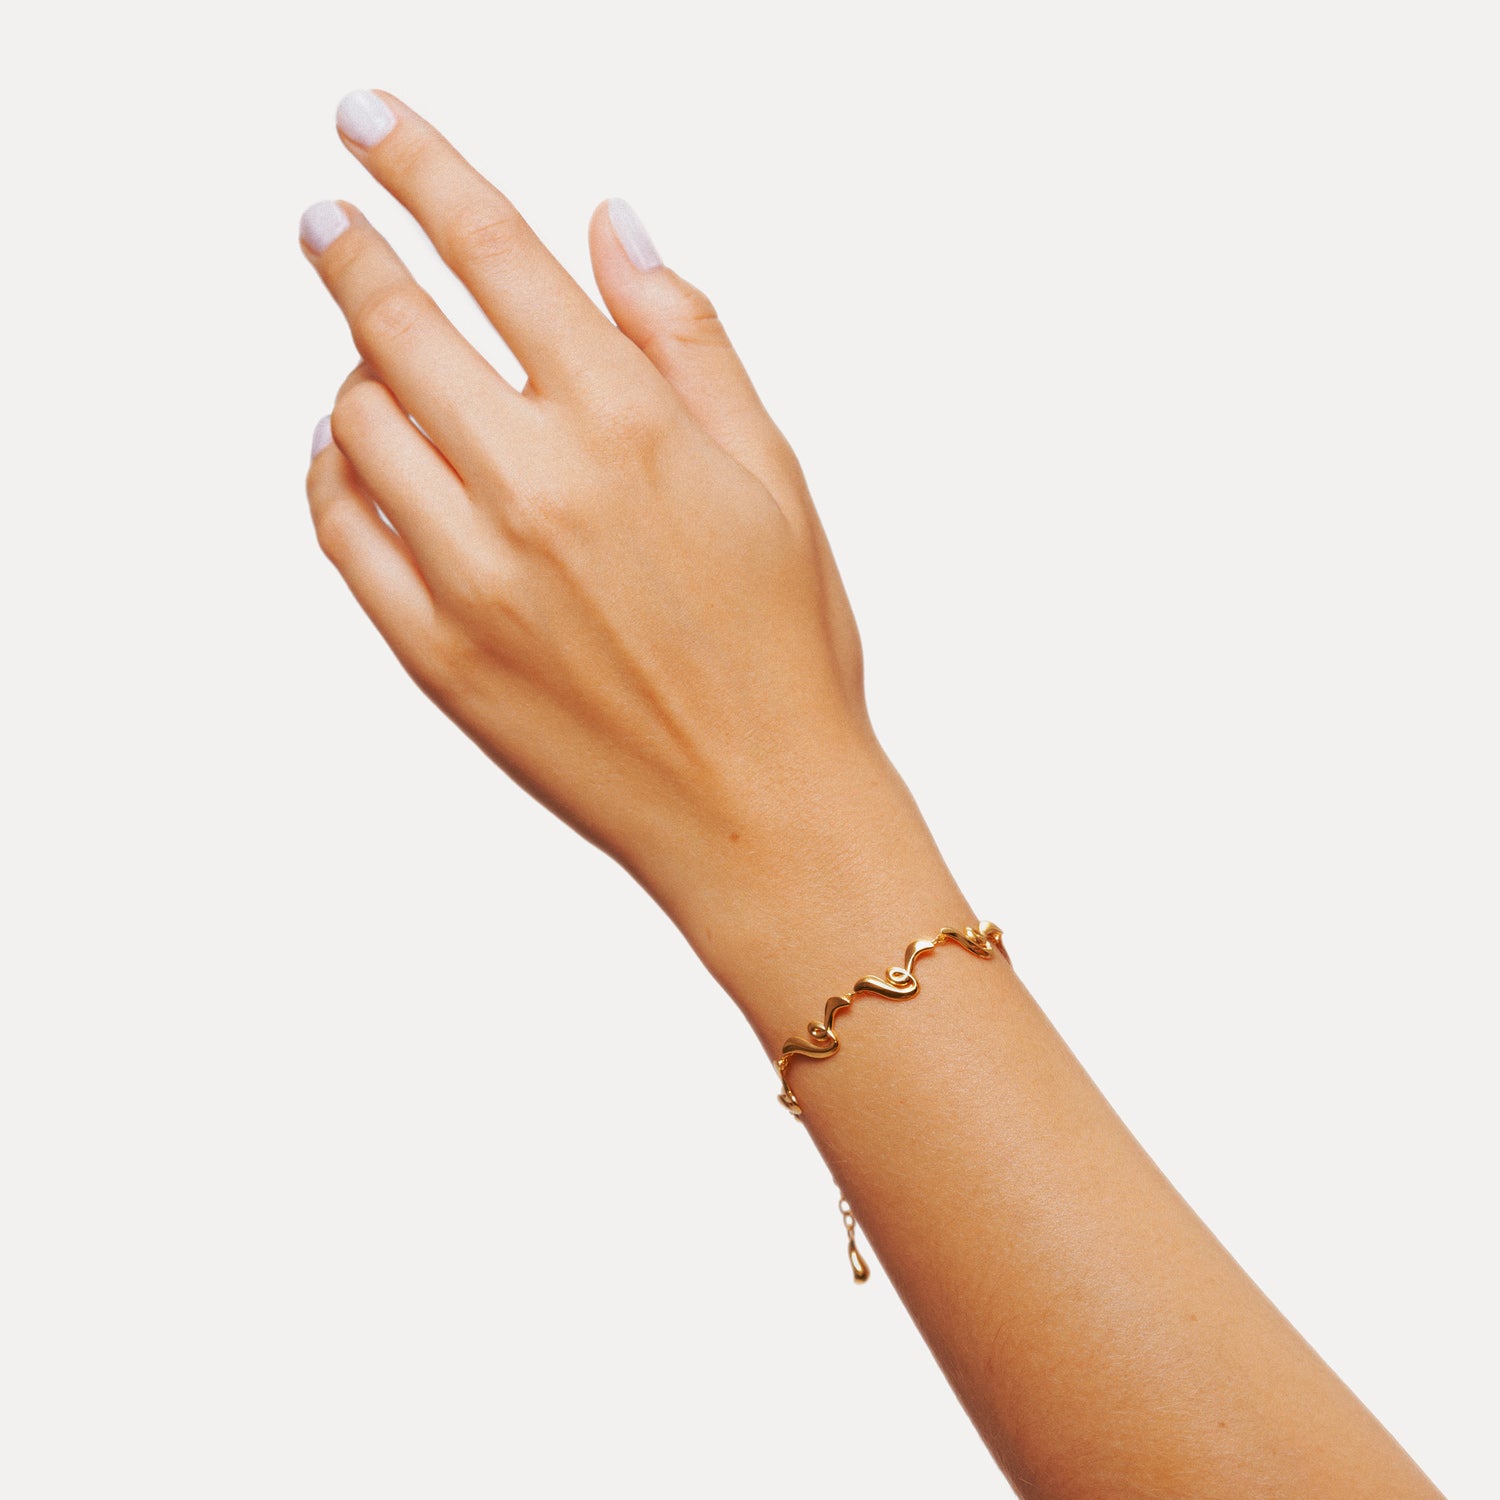 Poise Twirl Chain Bracelet, recycled 18k Gold Vermeil, shown on hand - VEYIA Berlin